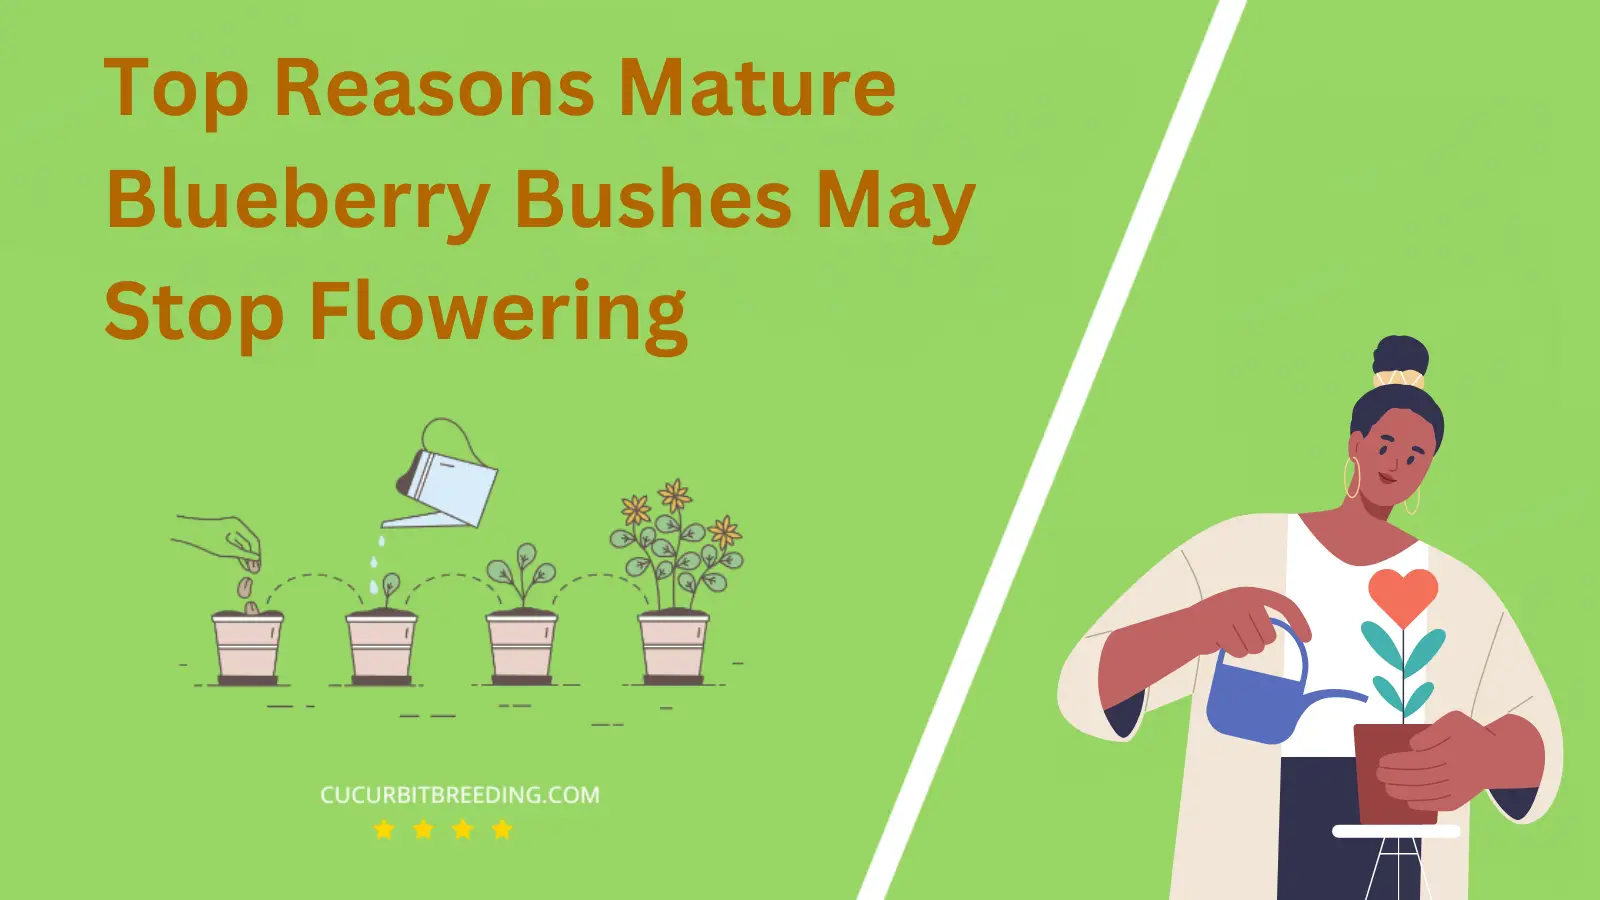 Top Reasons Mature Blueberry Bushes May Stop Flowering